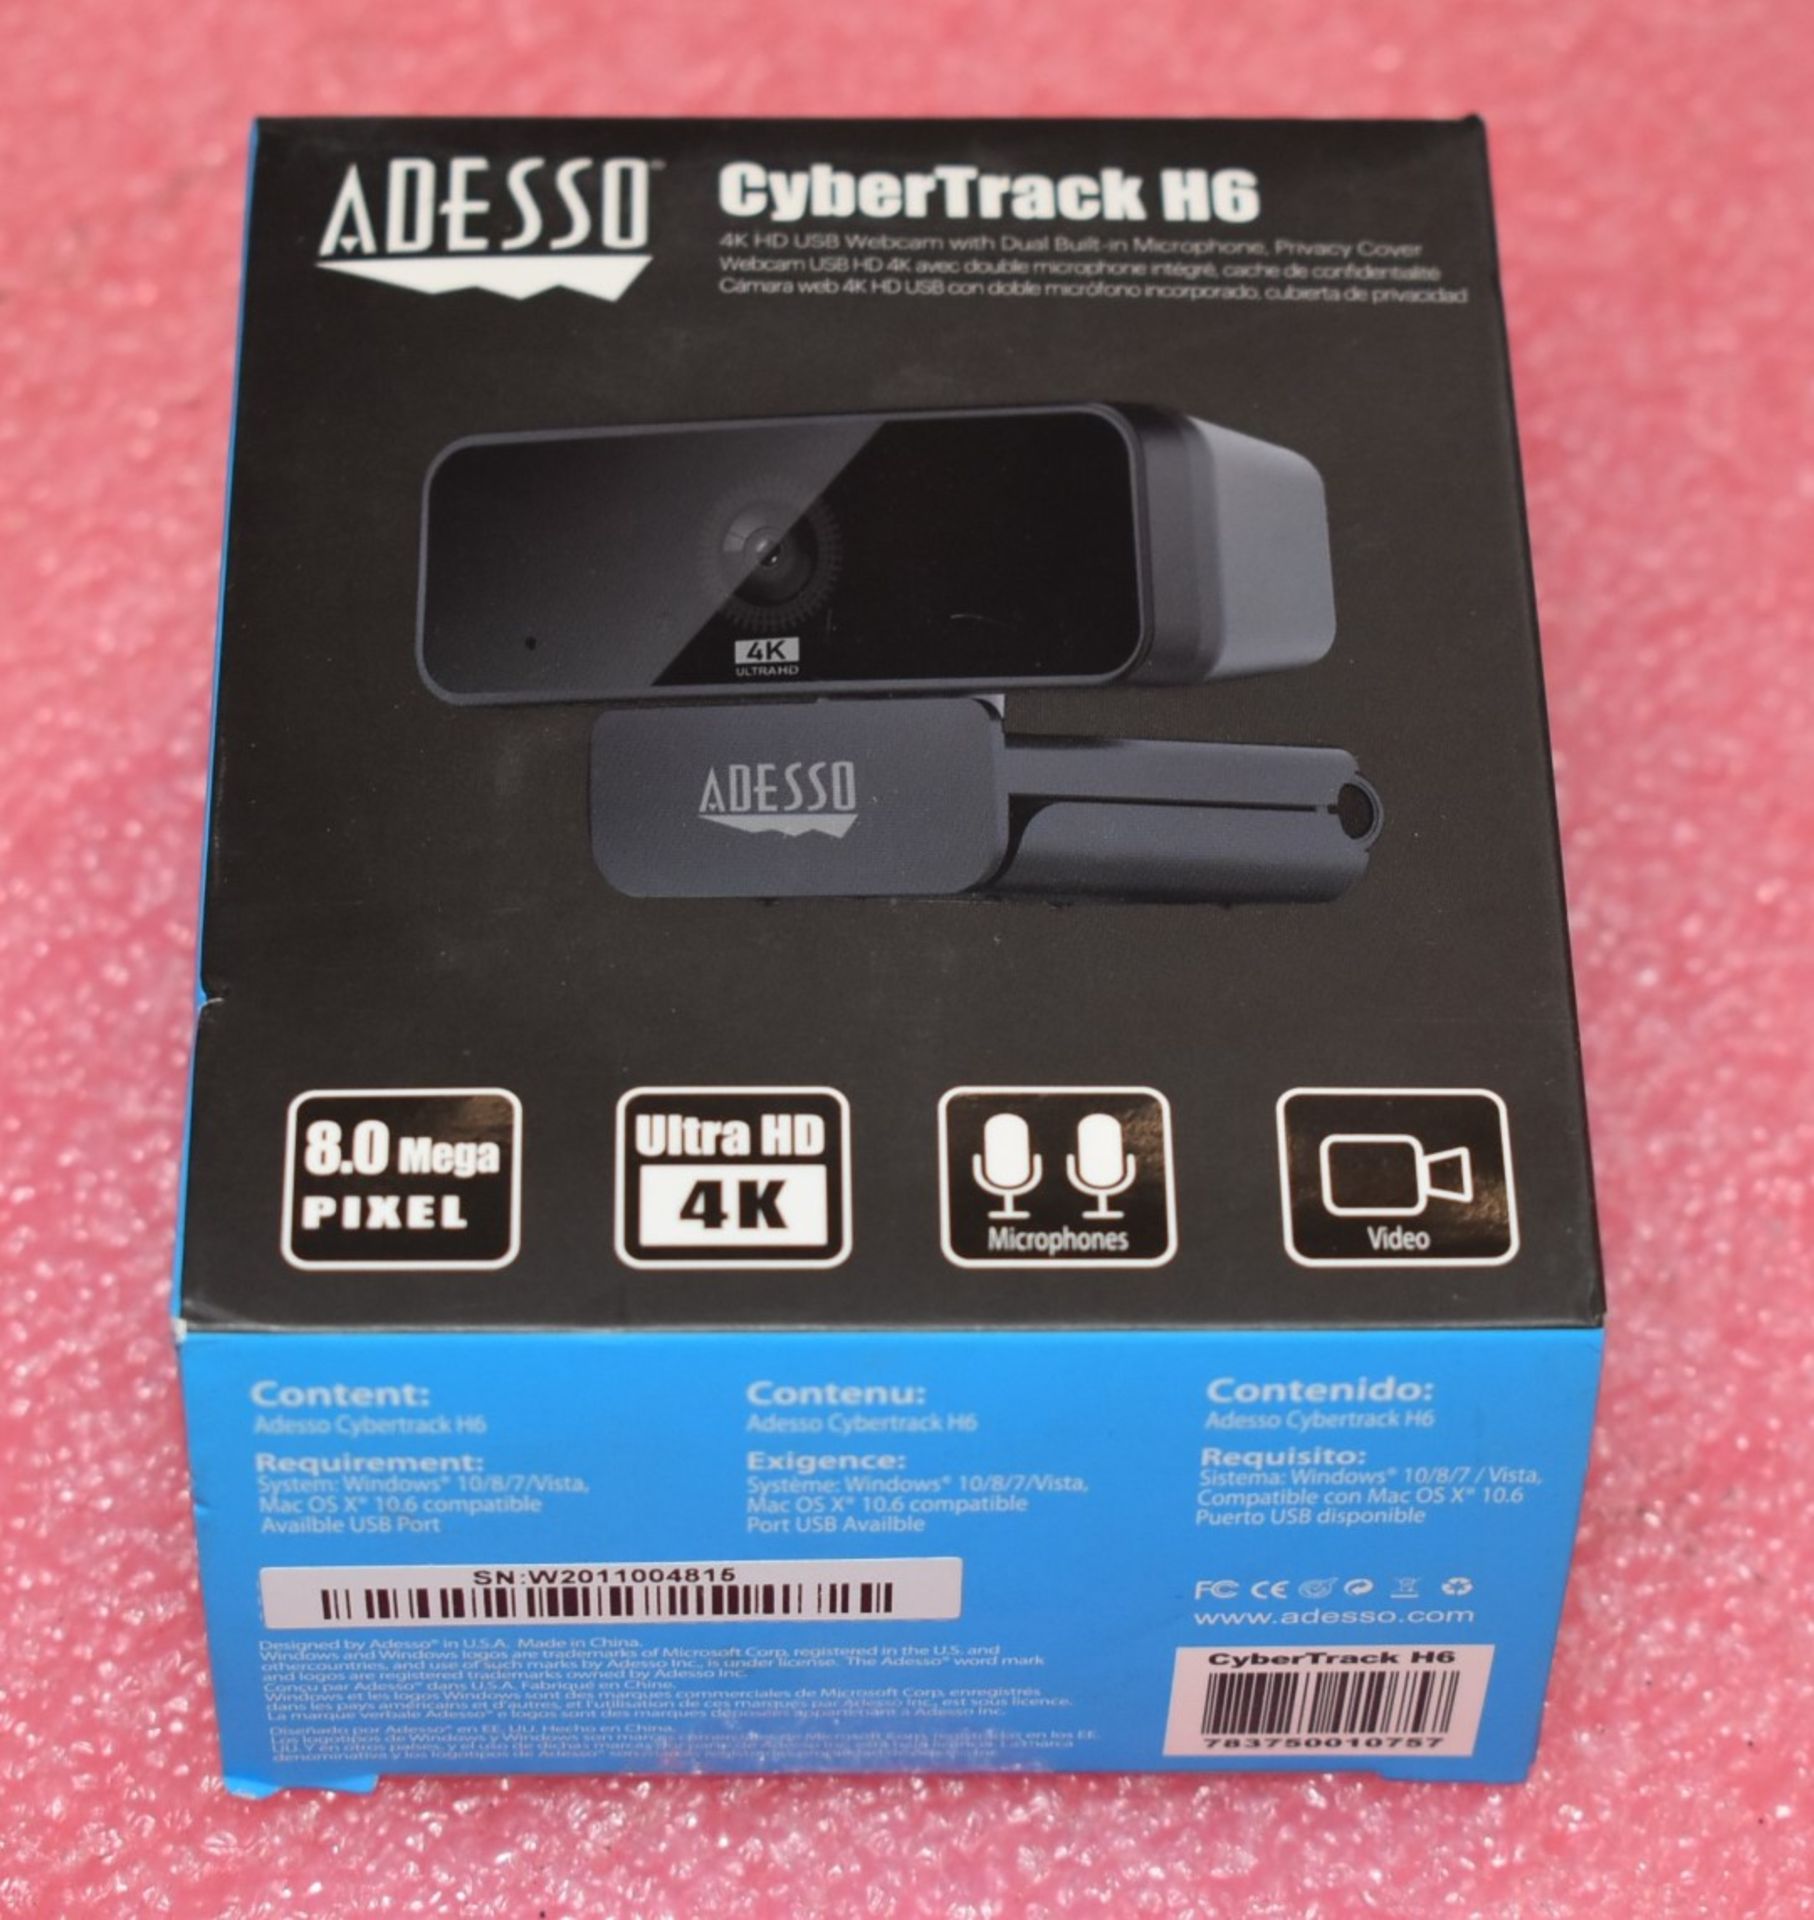 1 x Adesso CyberTrack H6 4K HD Webcam - New Boxed Stock - Image 4 of 4